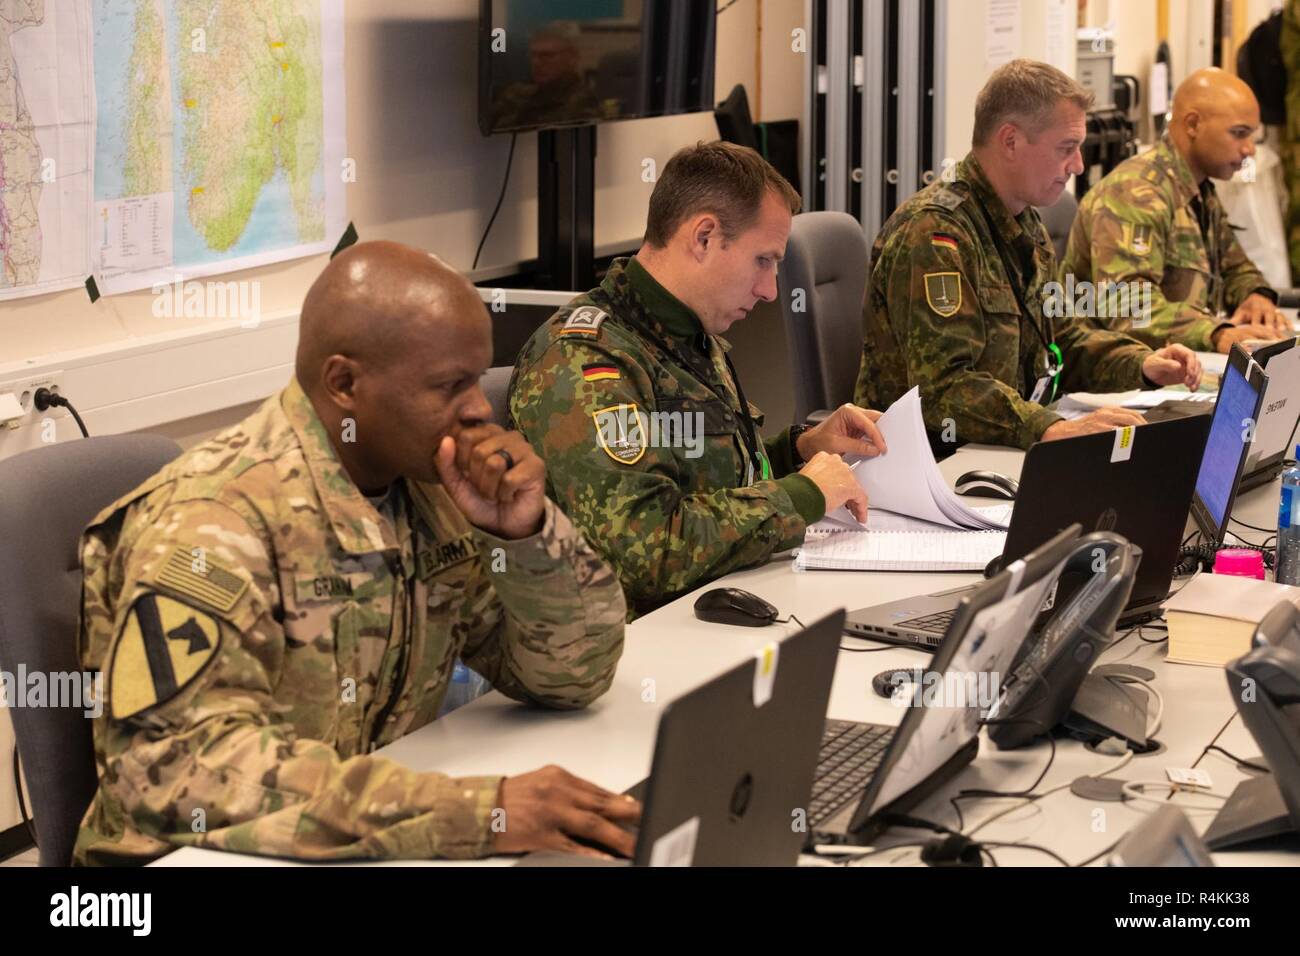 American and German soldiers work in the Tactical Operations Center at 1st German Netherlands Corps Headquarters for Trident Juncture 2018 in Jorstadmoen, Norway on October 26, 2018. The unit is part of NATO’s Very High Readiness Joint Task Force, which is exercising in Norway as part of Trident Juncture 2018. Stock Photo